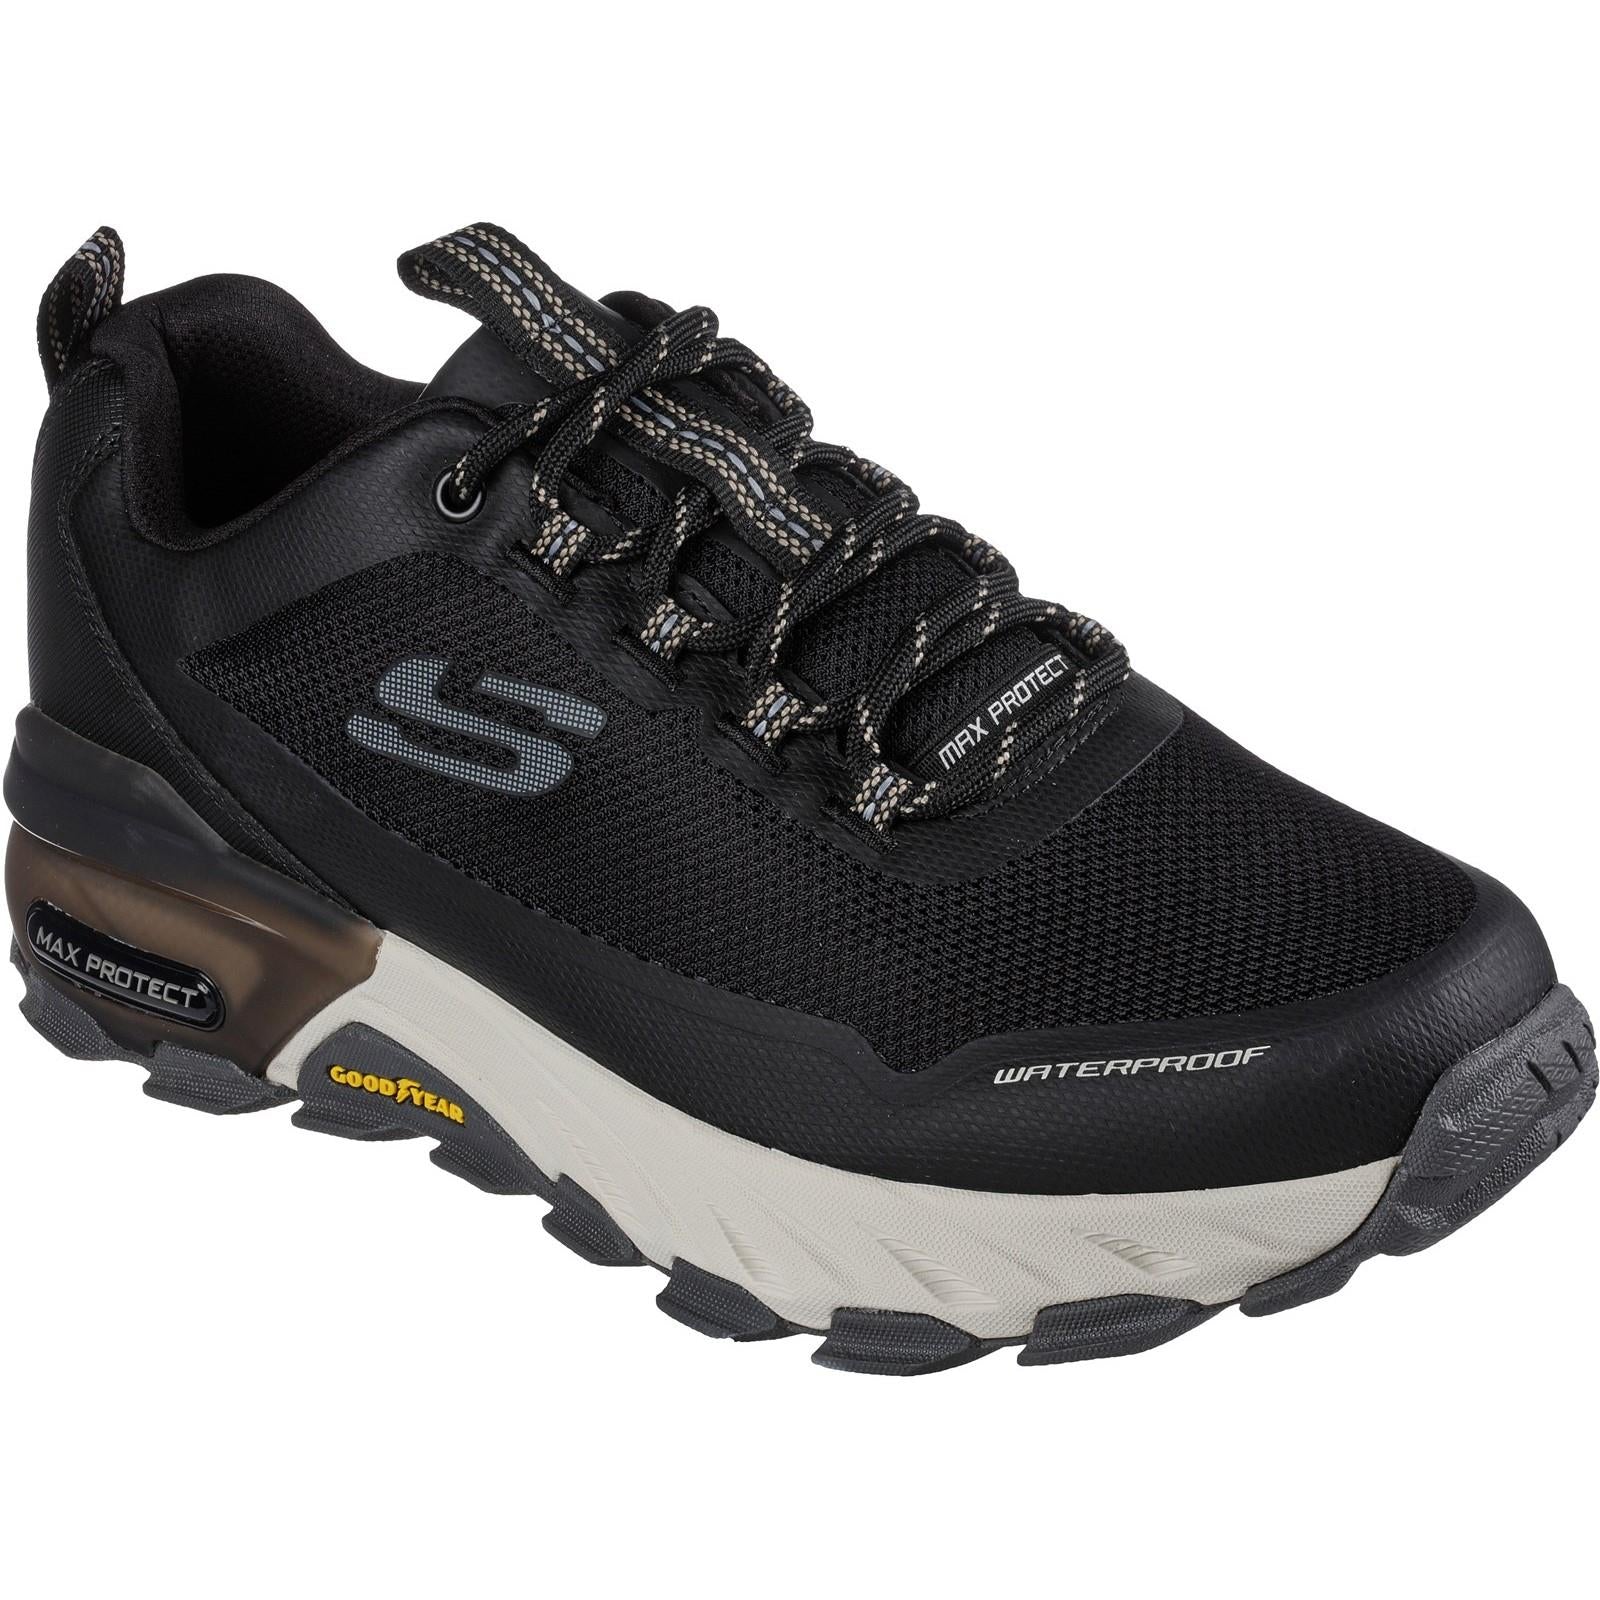 Skechers Max Protect Fast Track memory foam trail walking hiking trainers shoes